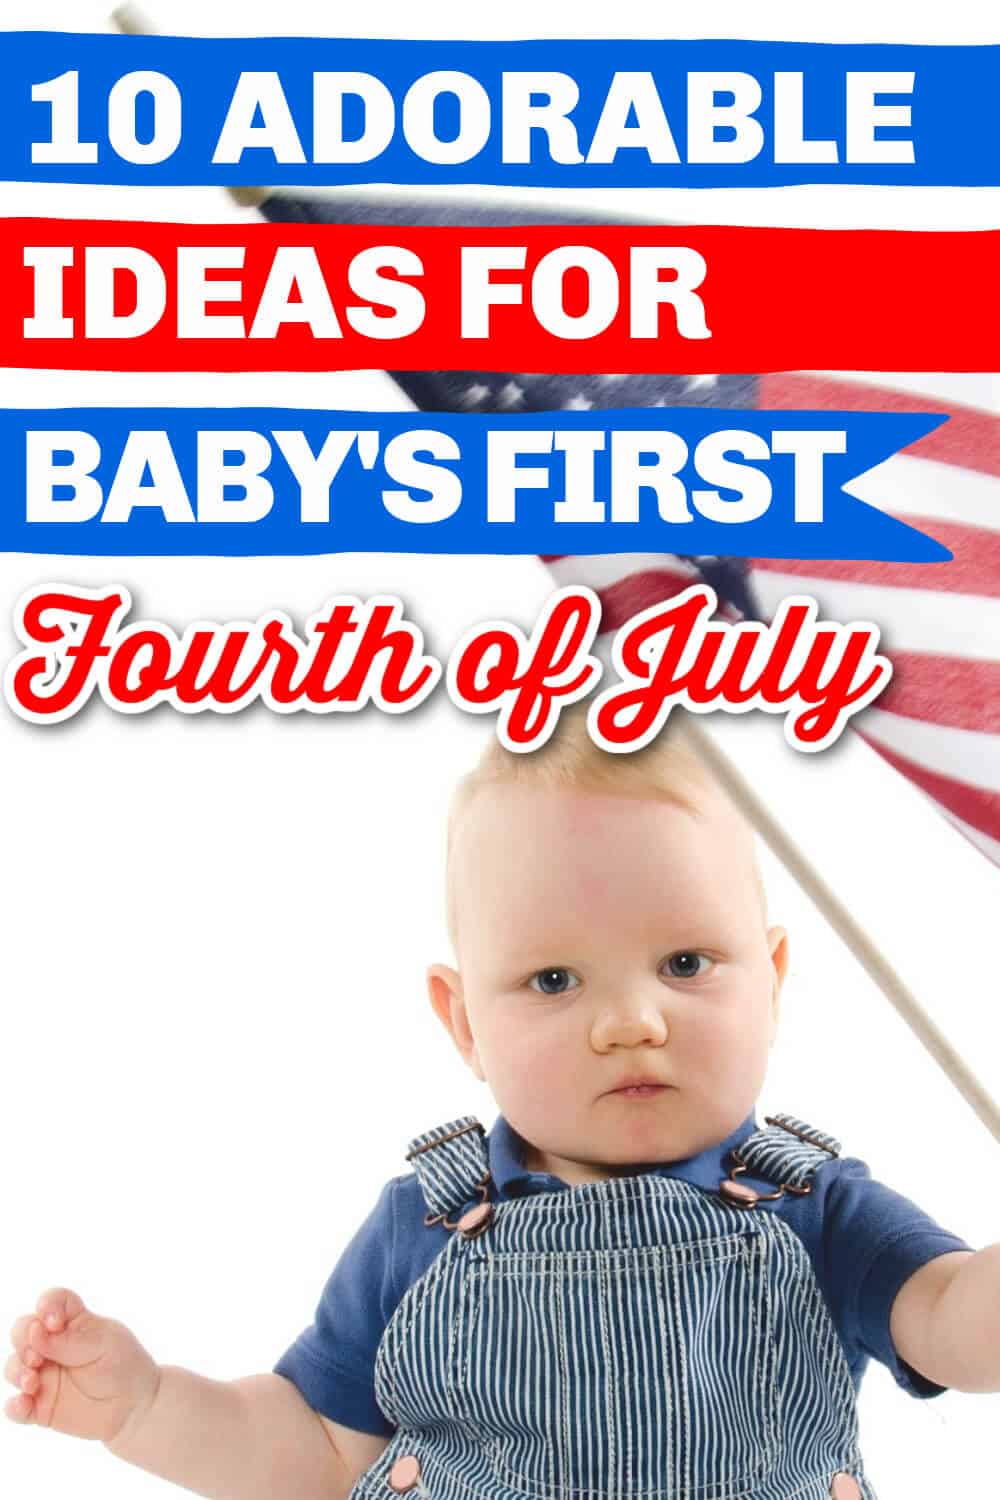 Baby's first Fourth of July